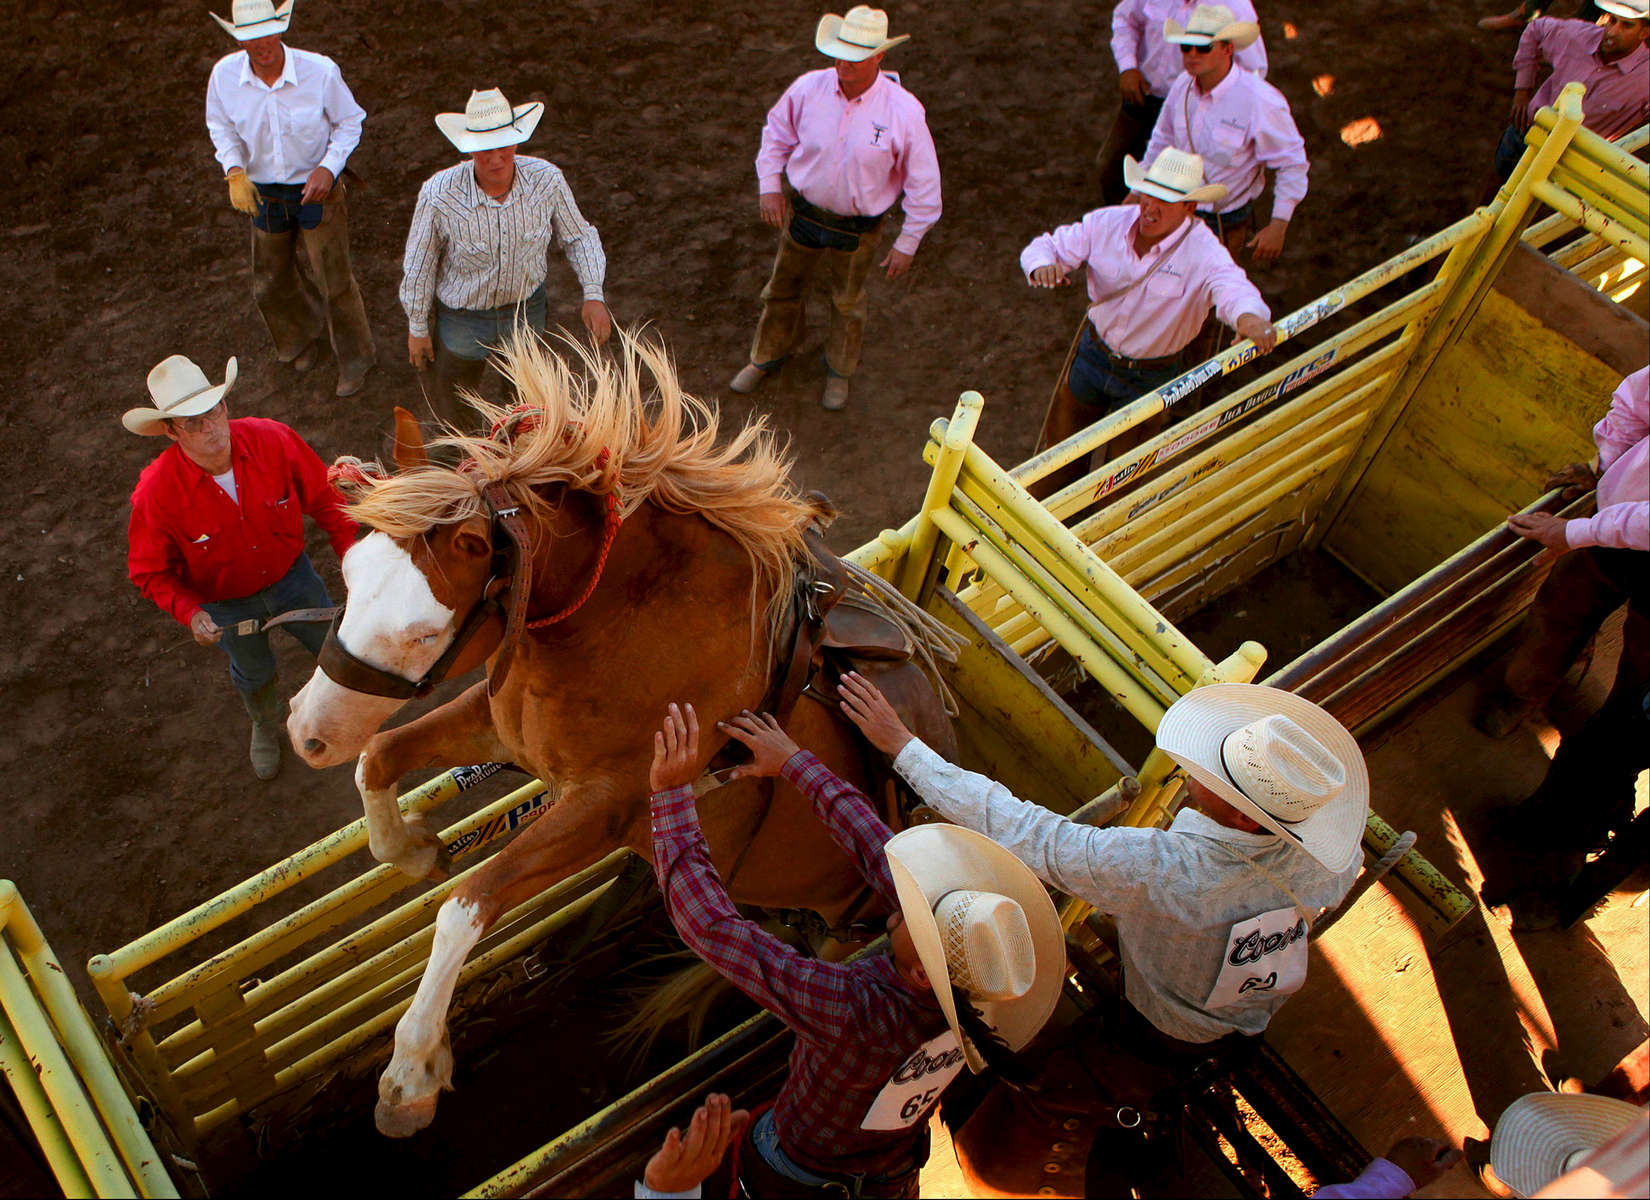 Cowboys watched helplessly as a bucking horse reared up in the chute during the Ride for the Brand Championship Ranch Rodeo at the Norris-Penrose Stadium in Colorado Springs, Colo.